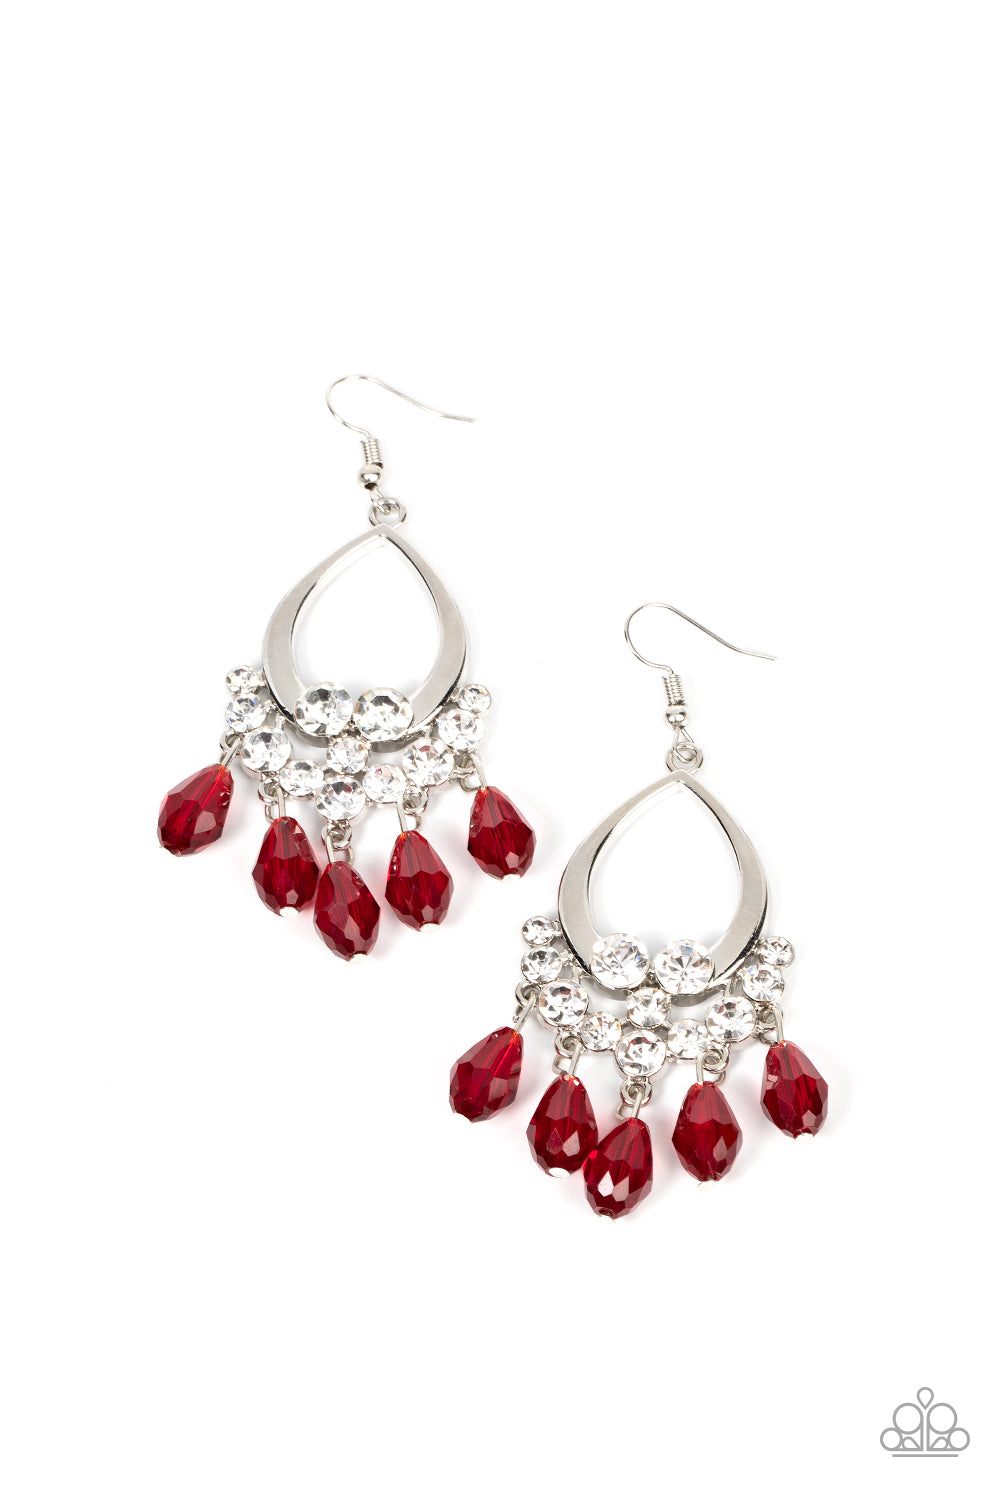 Paparazzi Earrings - Famous Fashionista - Red